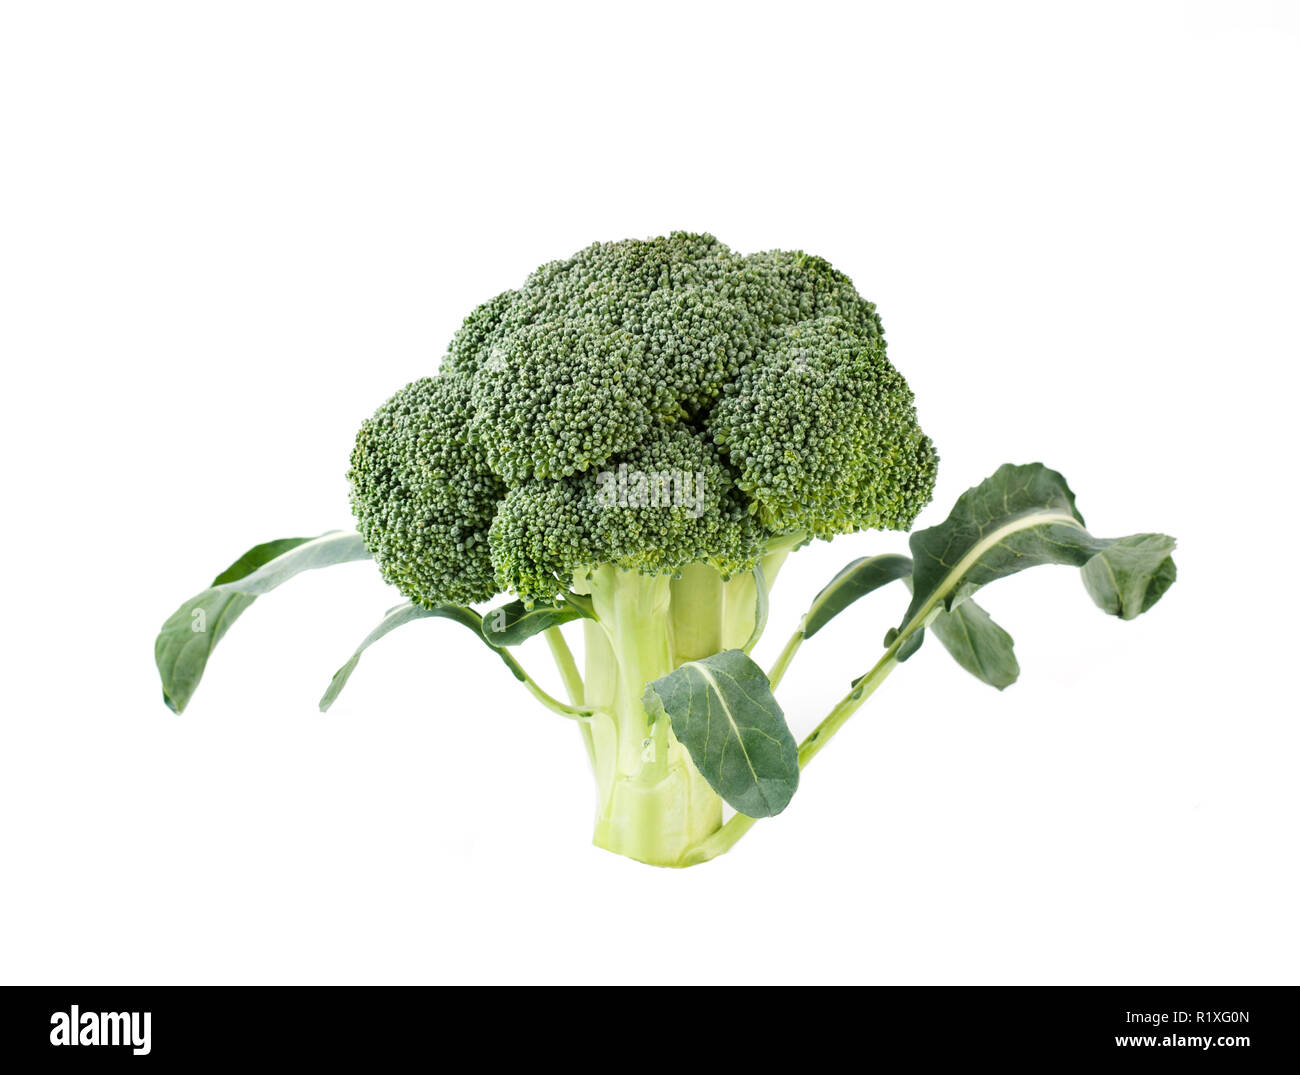 Broccol..Close up view of raw broccoli on white background. Stock Photo